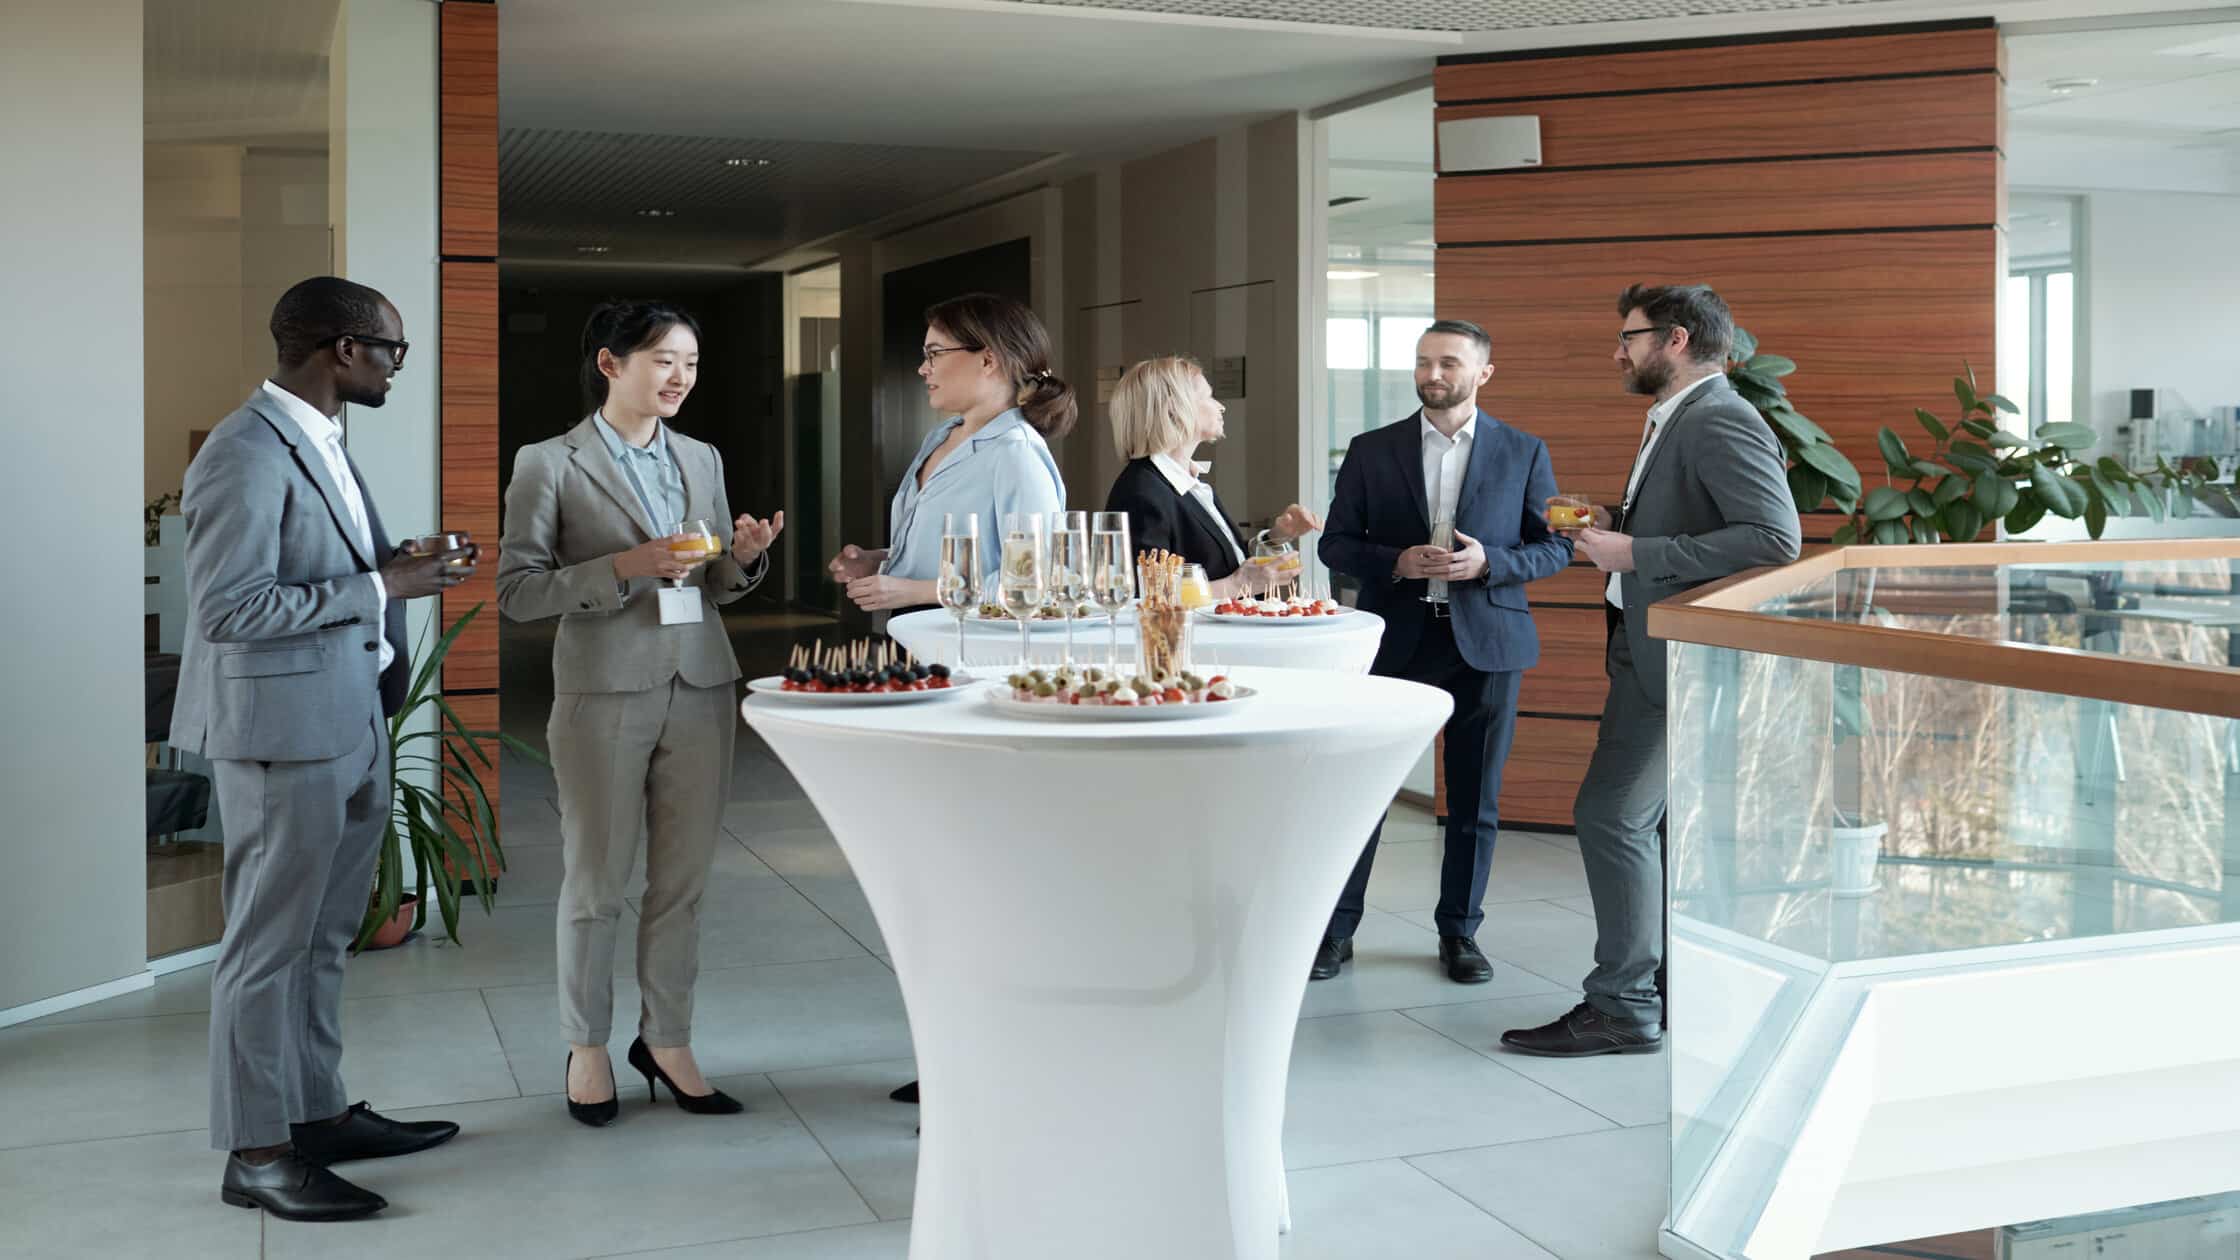 How do you make your corporate event successful?